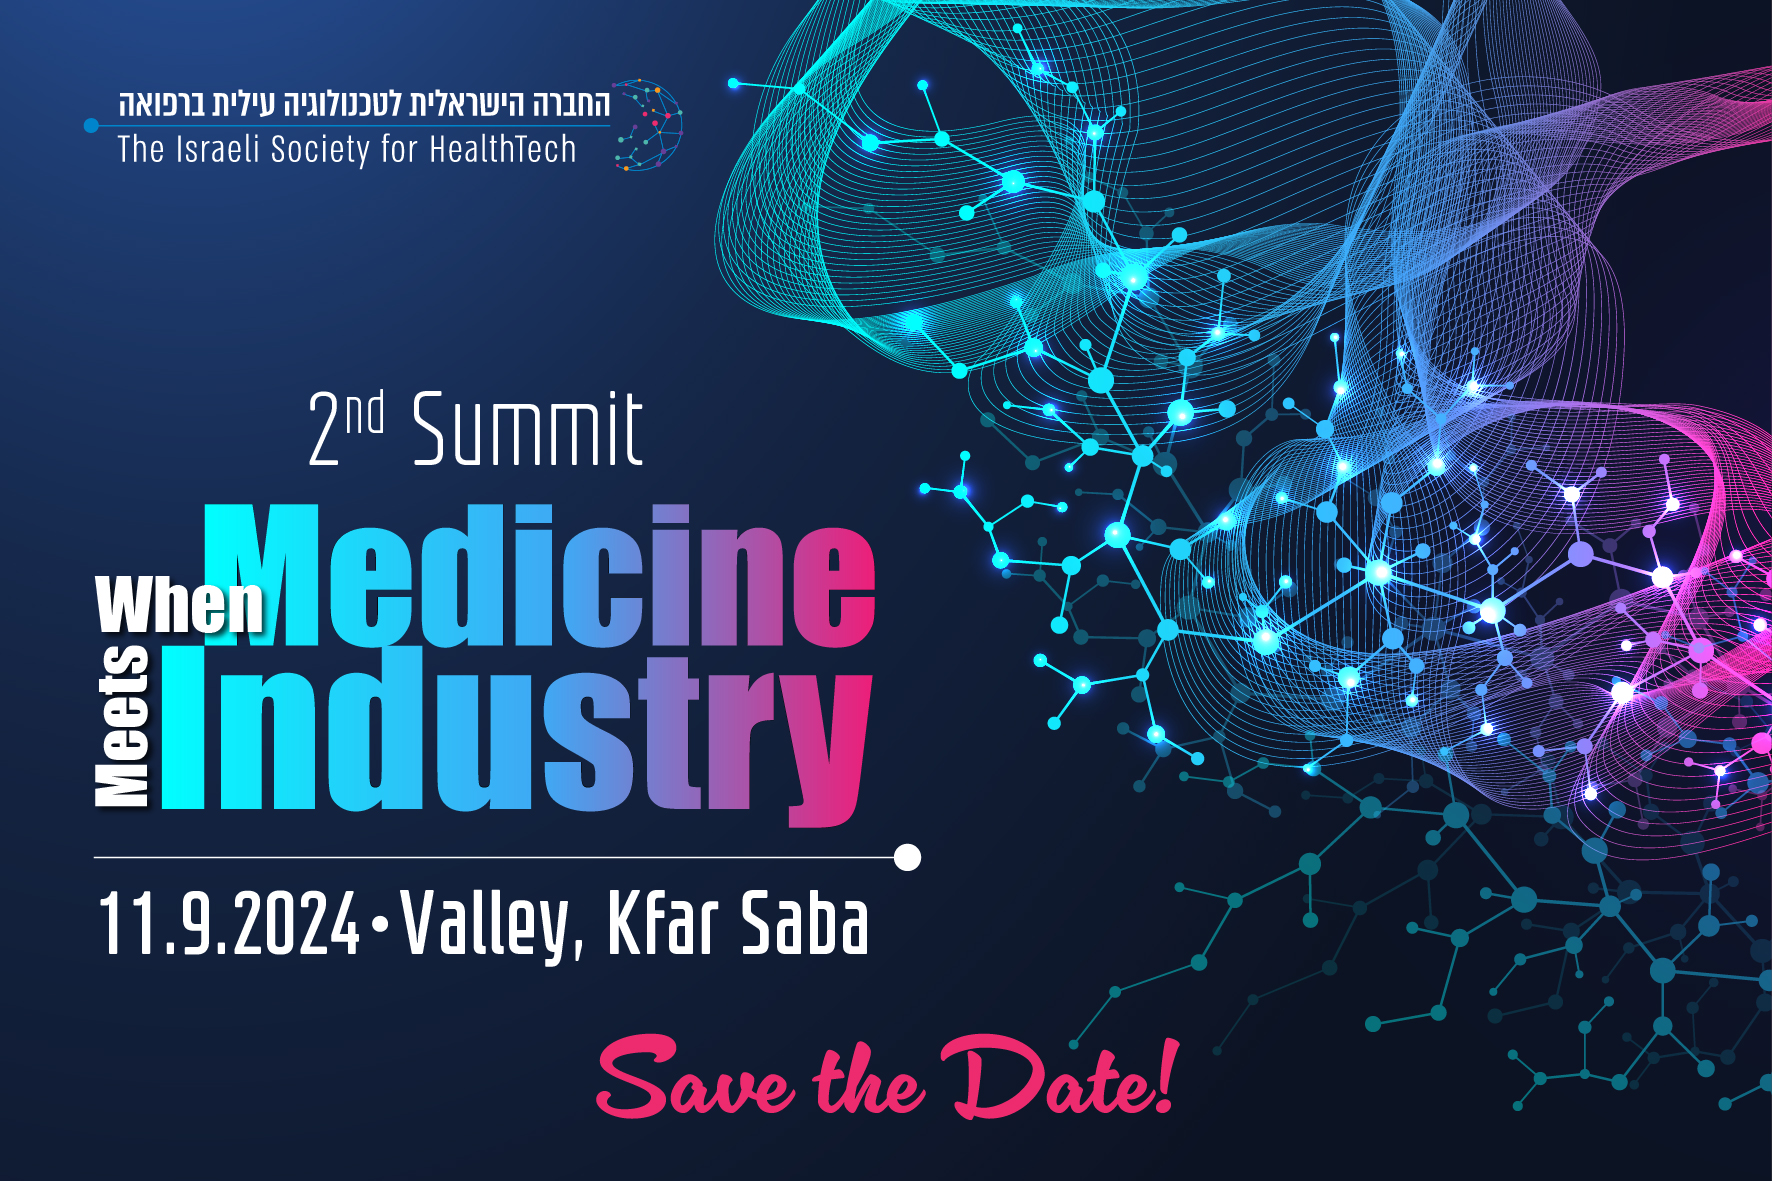 2nd Summit of the Israeli Society for HealthTech 2024